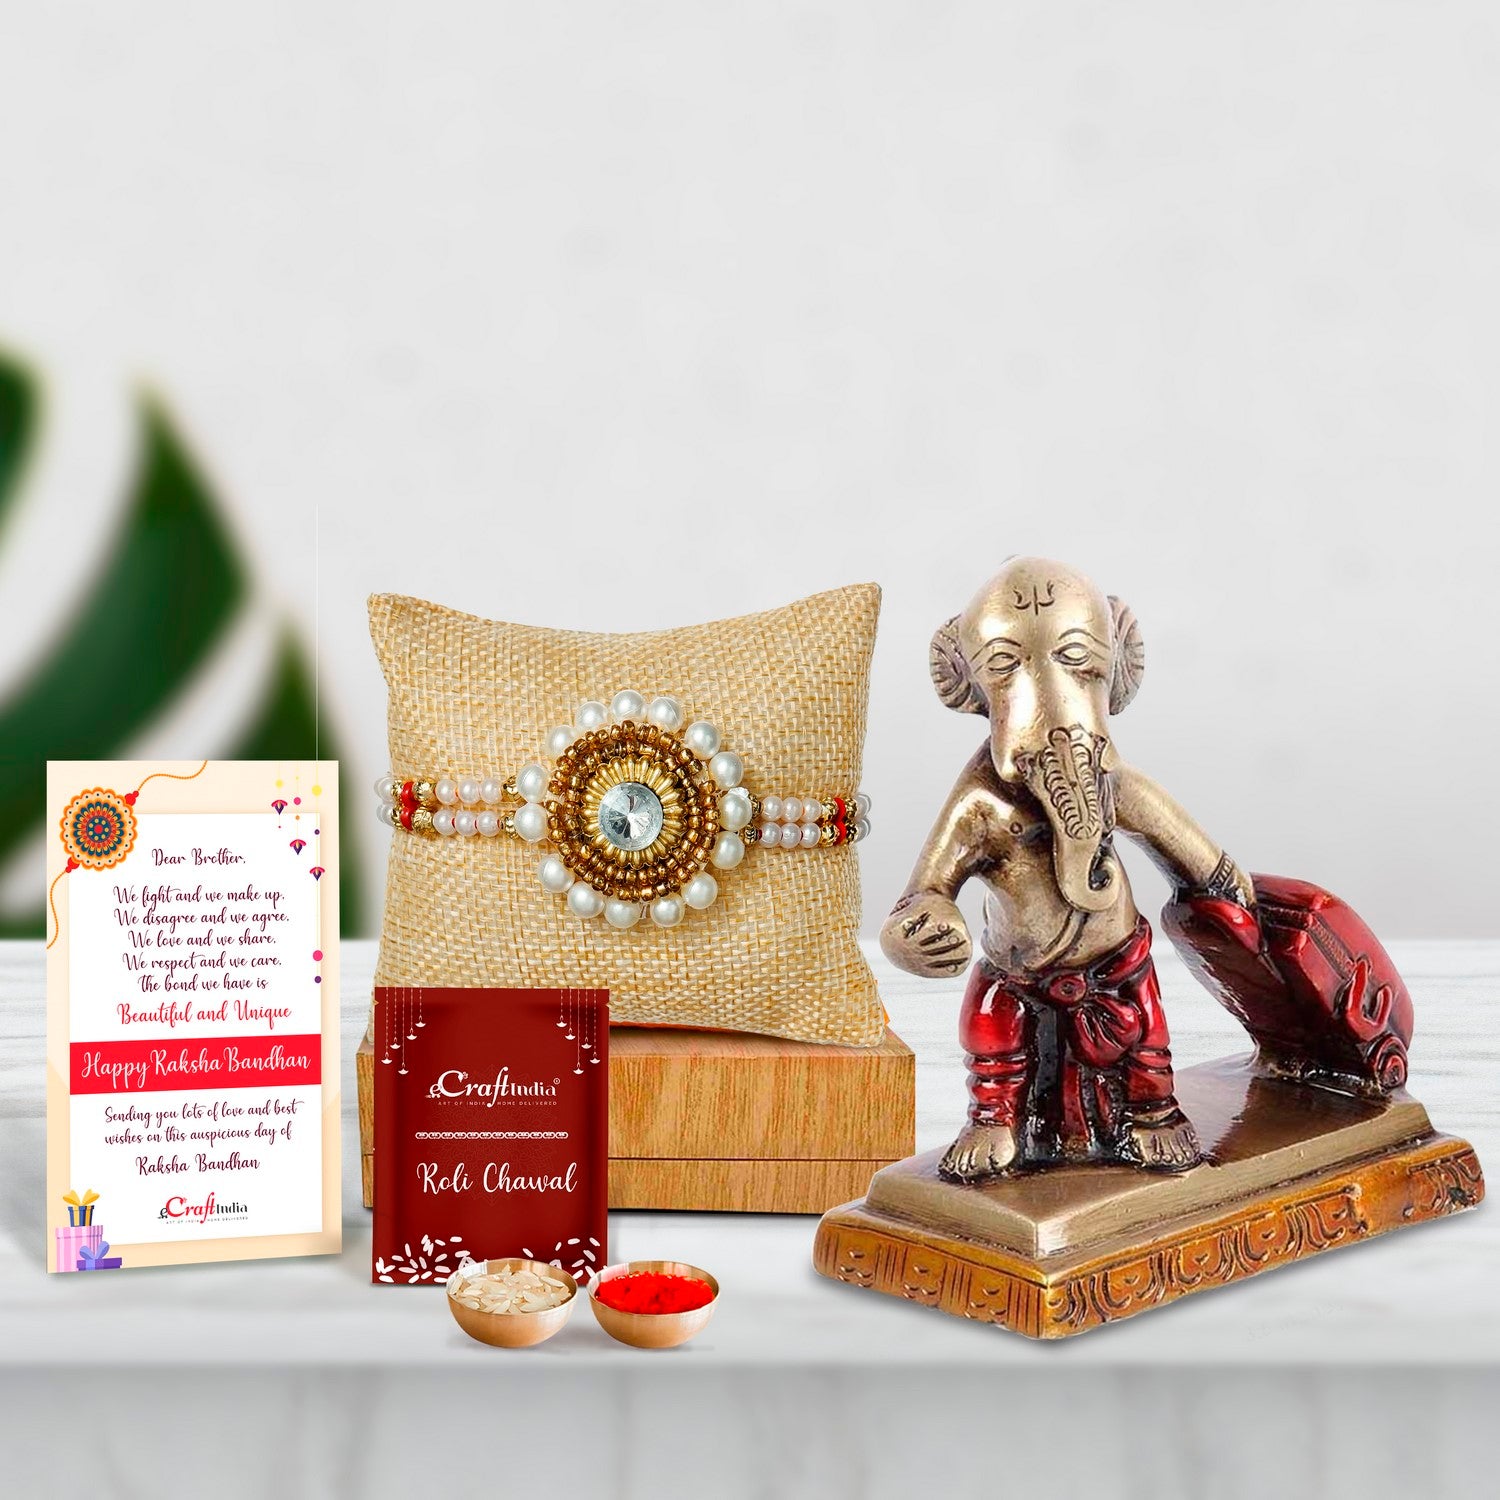 Designer Handcrafted Stone Pearl Rakhi with Brass Ganesha Carrying Happiness around the world Antique Showpiece and Roli Chawal Pack, Best Wishes Greeting Card